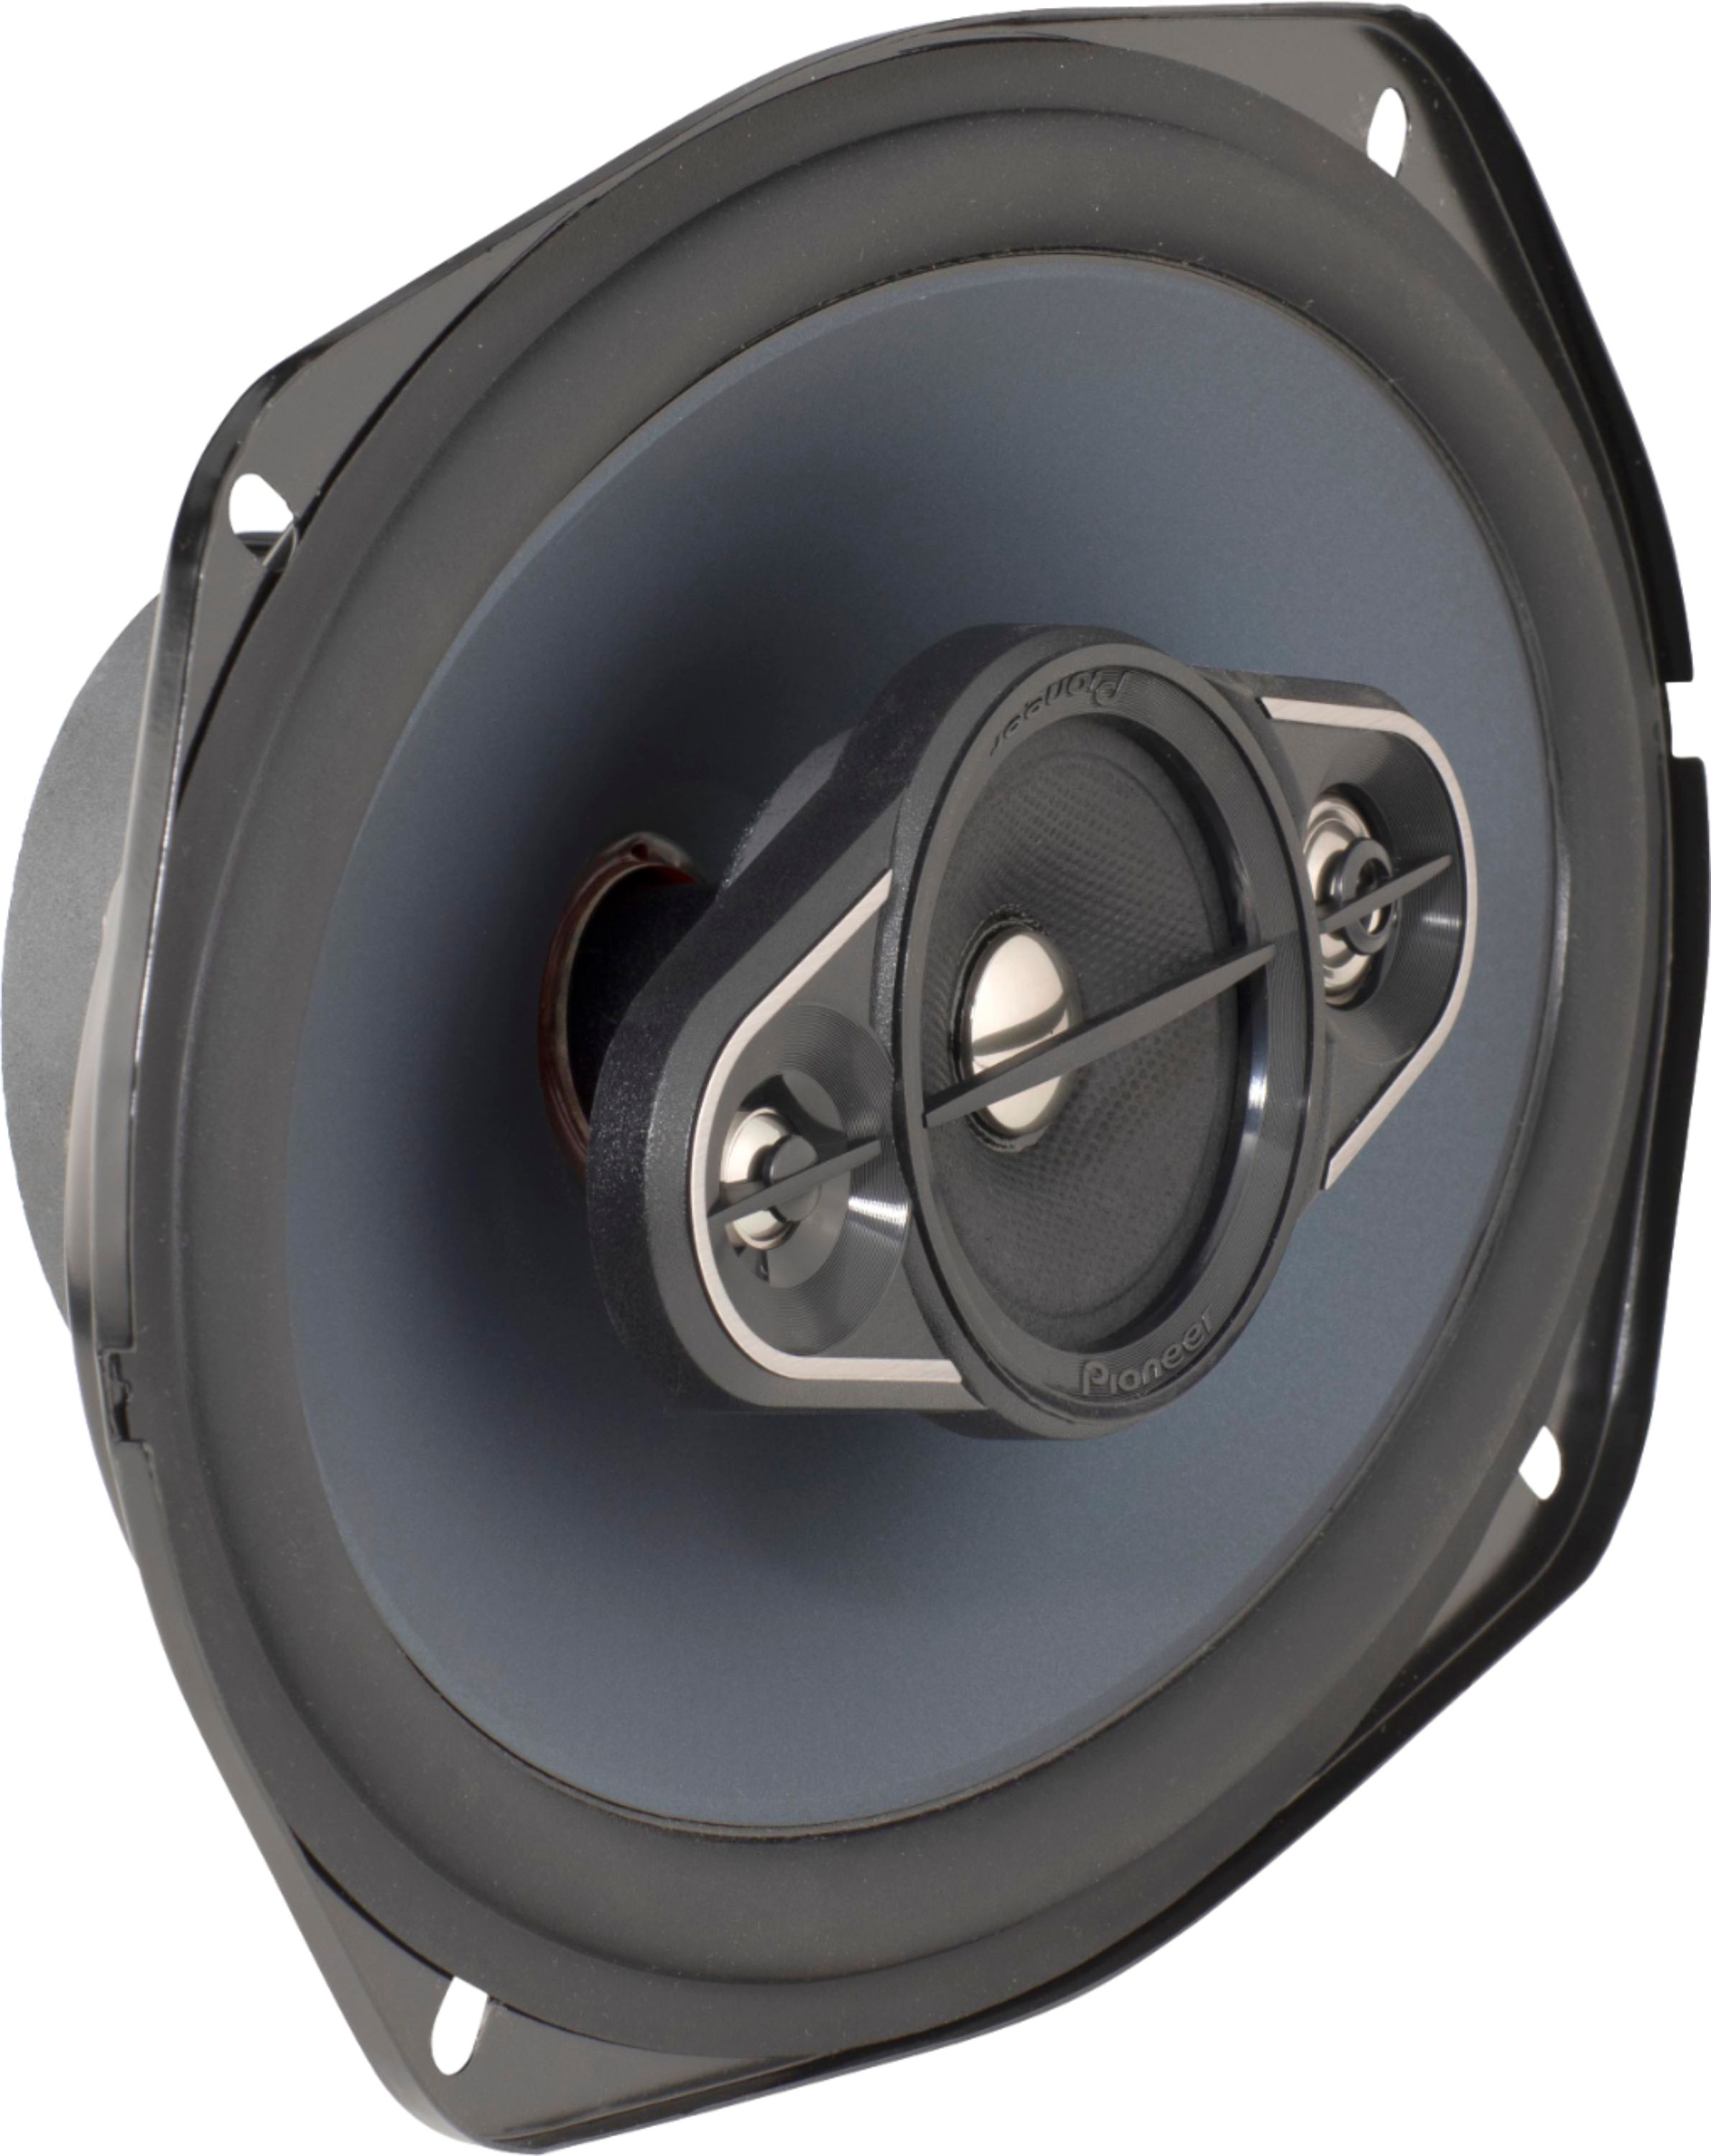 Zinloos wimper zuur Pioneer 6" x 9" 4-way 450 W Max Power Coaxial Speakers (pair) BLUE TS-A693R  - Best Buy